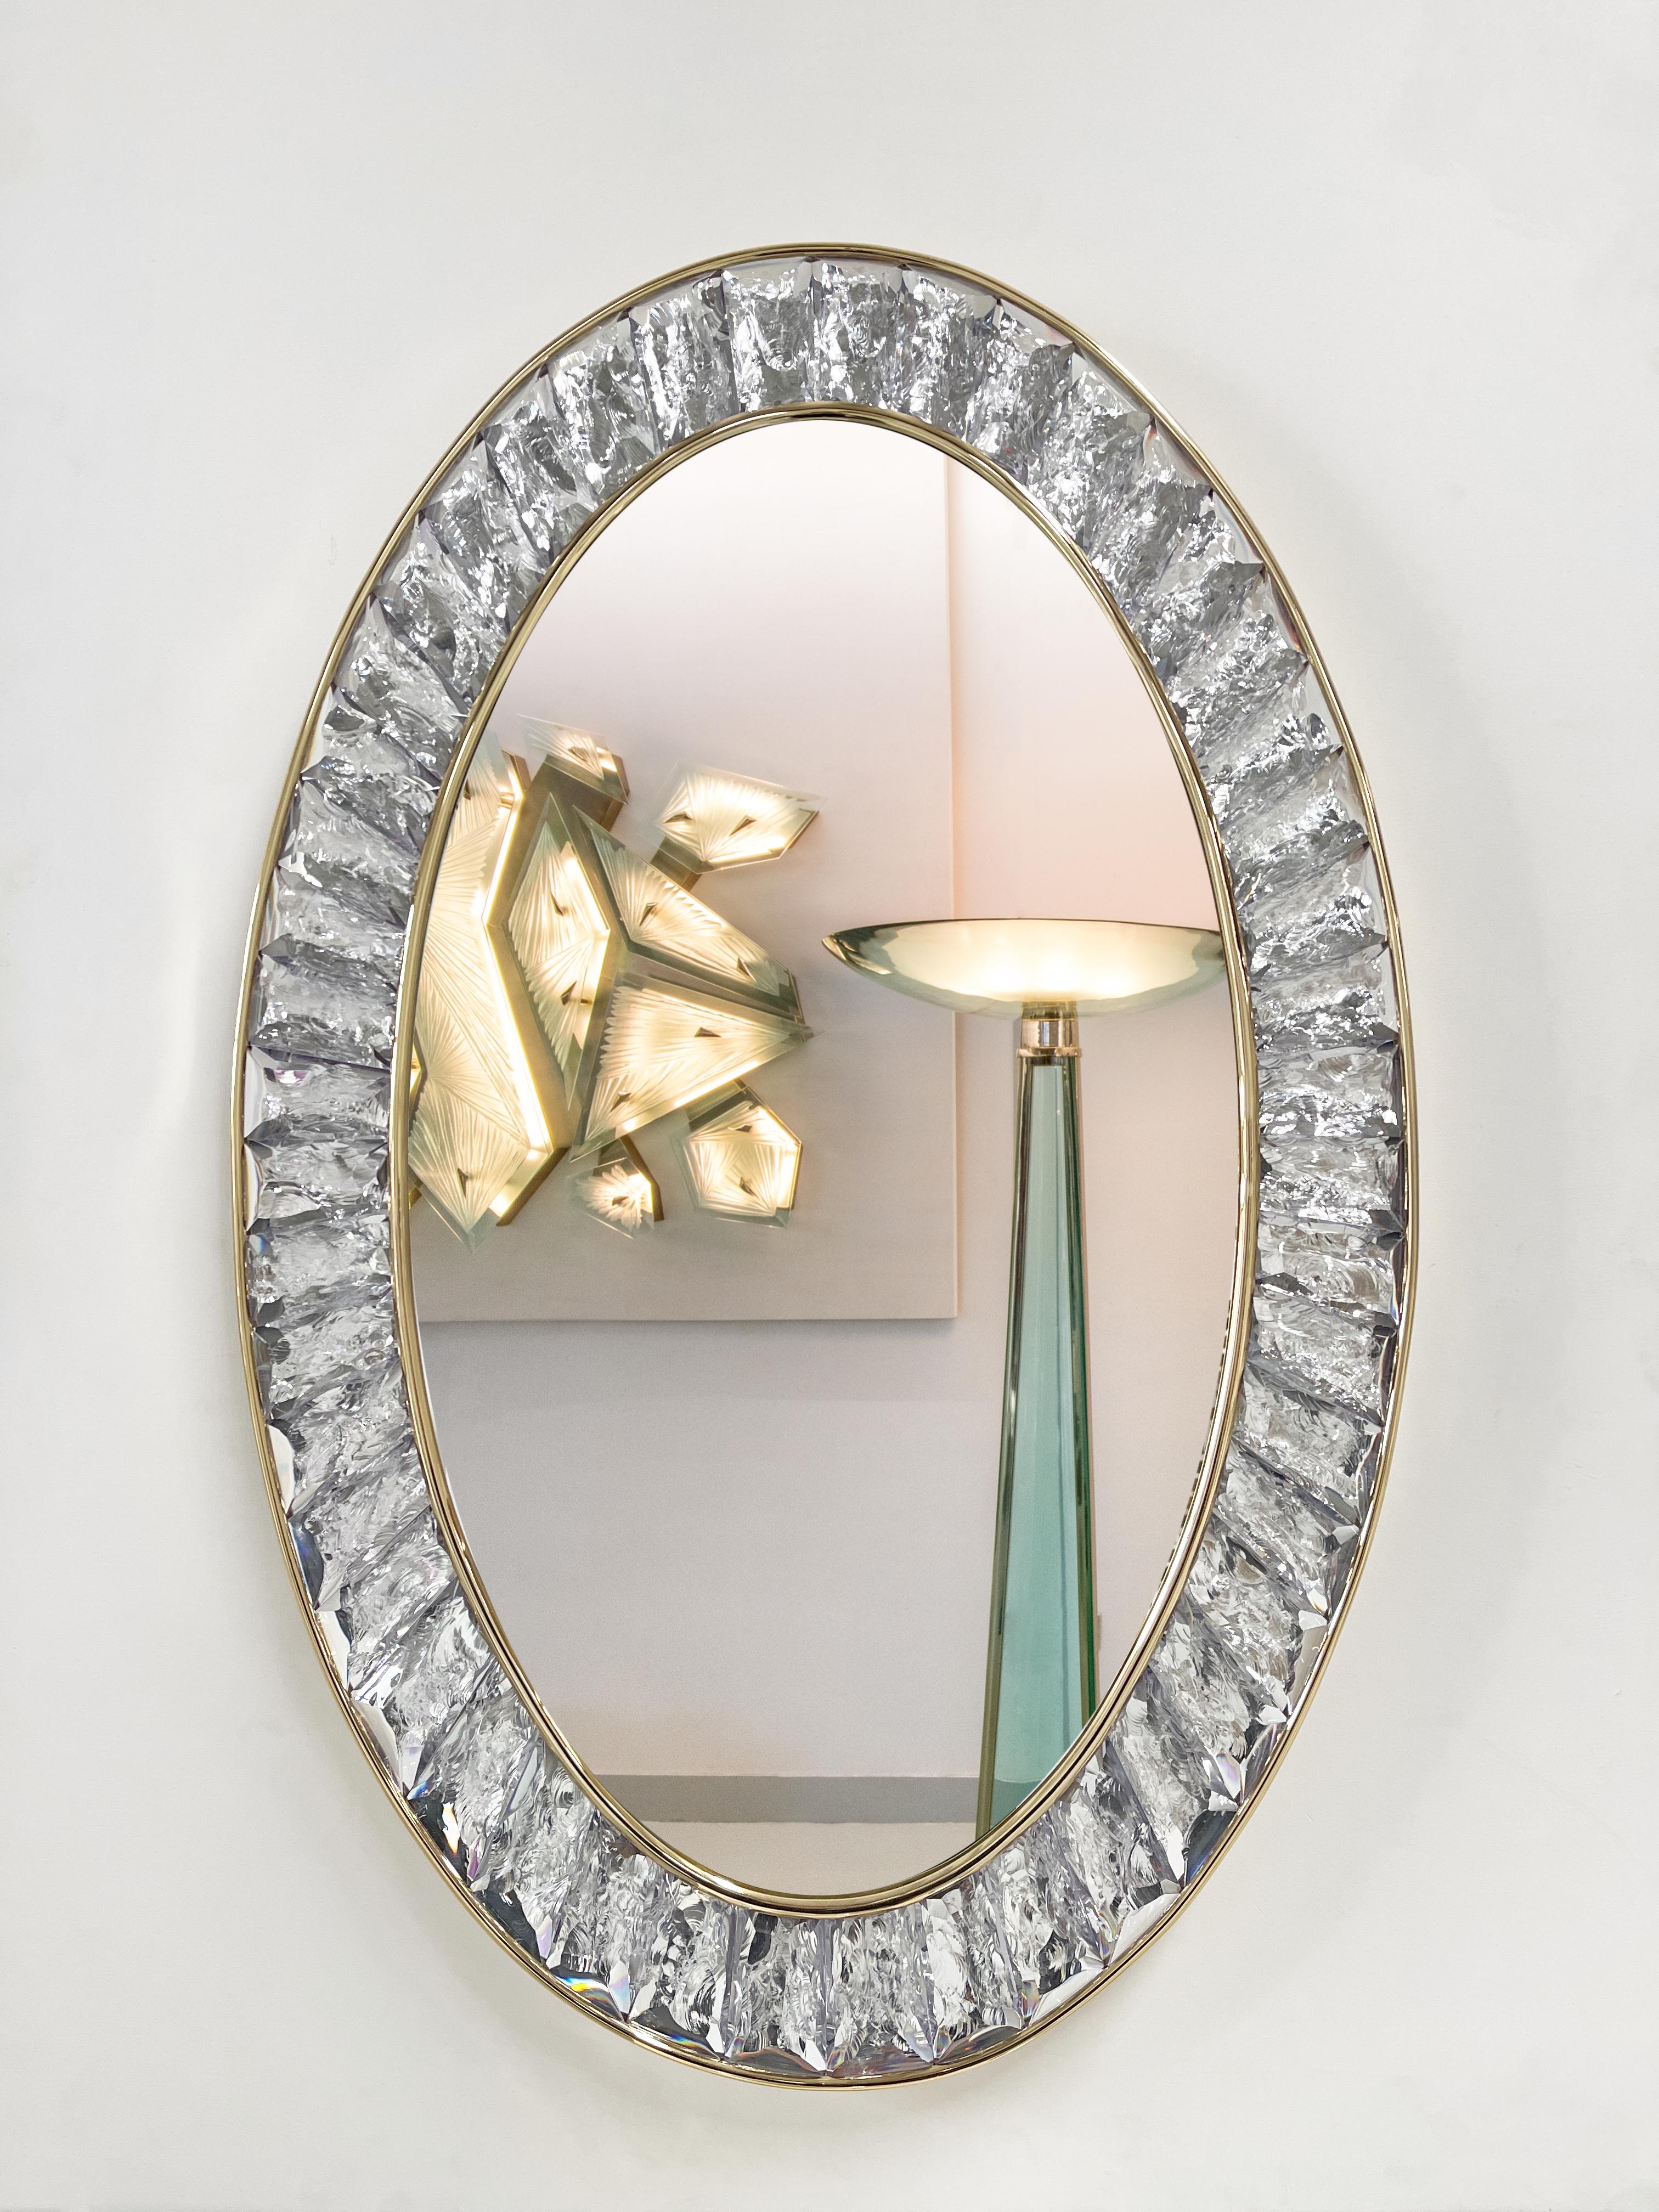 2022 Contemporary by Ghirò Studio Wall Mirror. Martelè wall mirror is an artistic object of pure art and italian design. The support structure is in 24 kt polished gold plated brass. The oval frame of the mirror is made up of hand-carved crystal